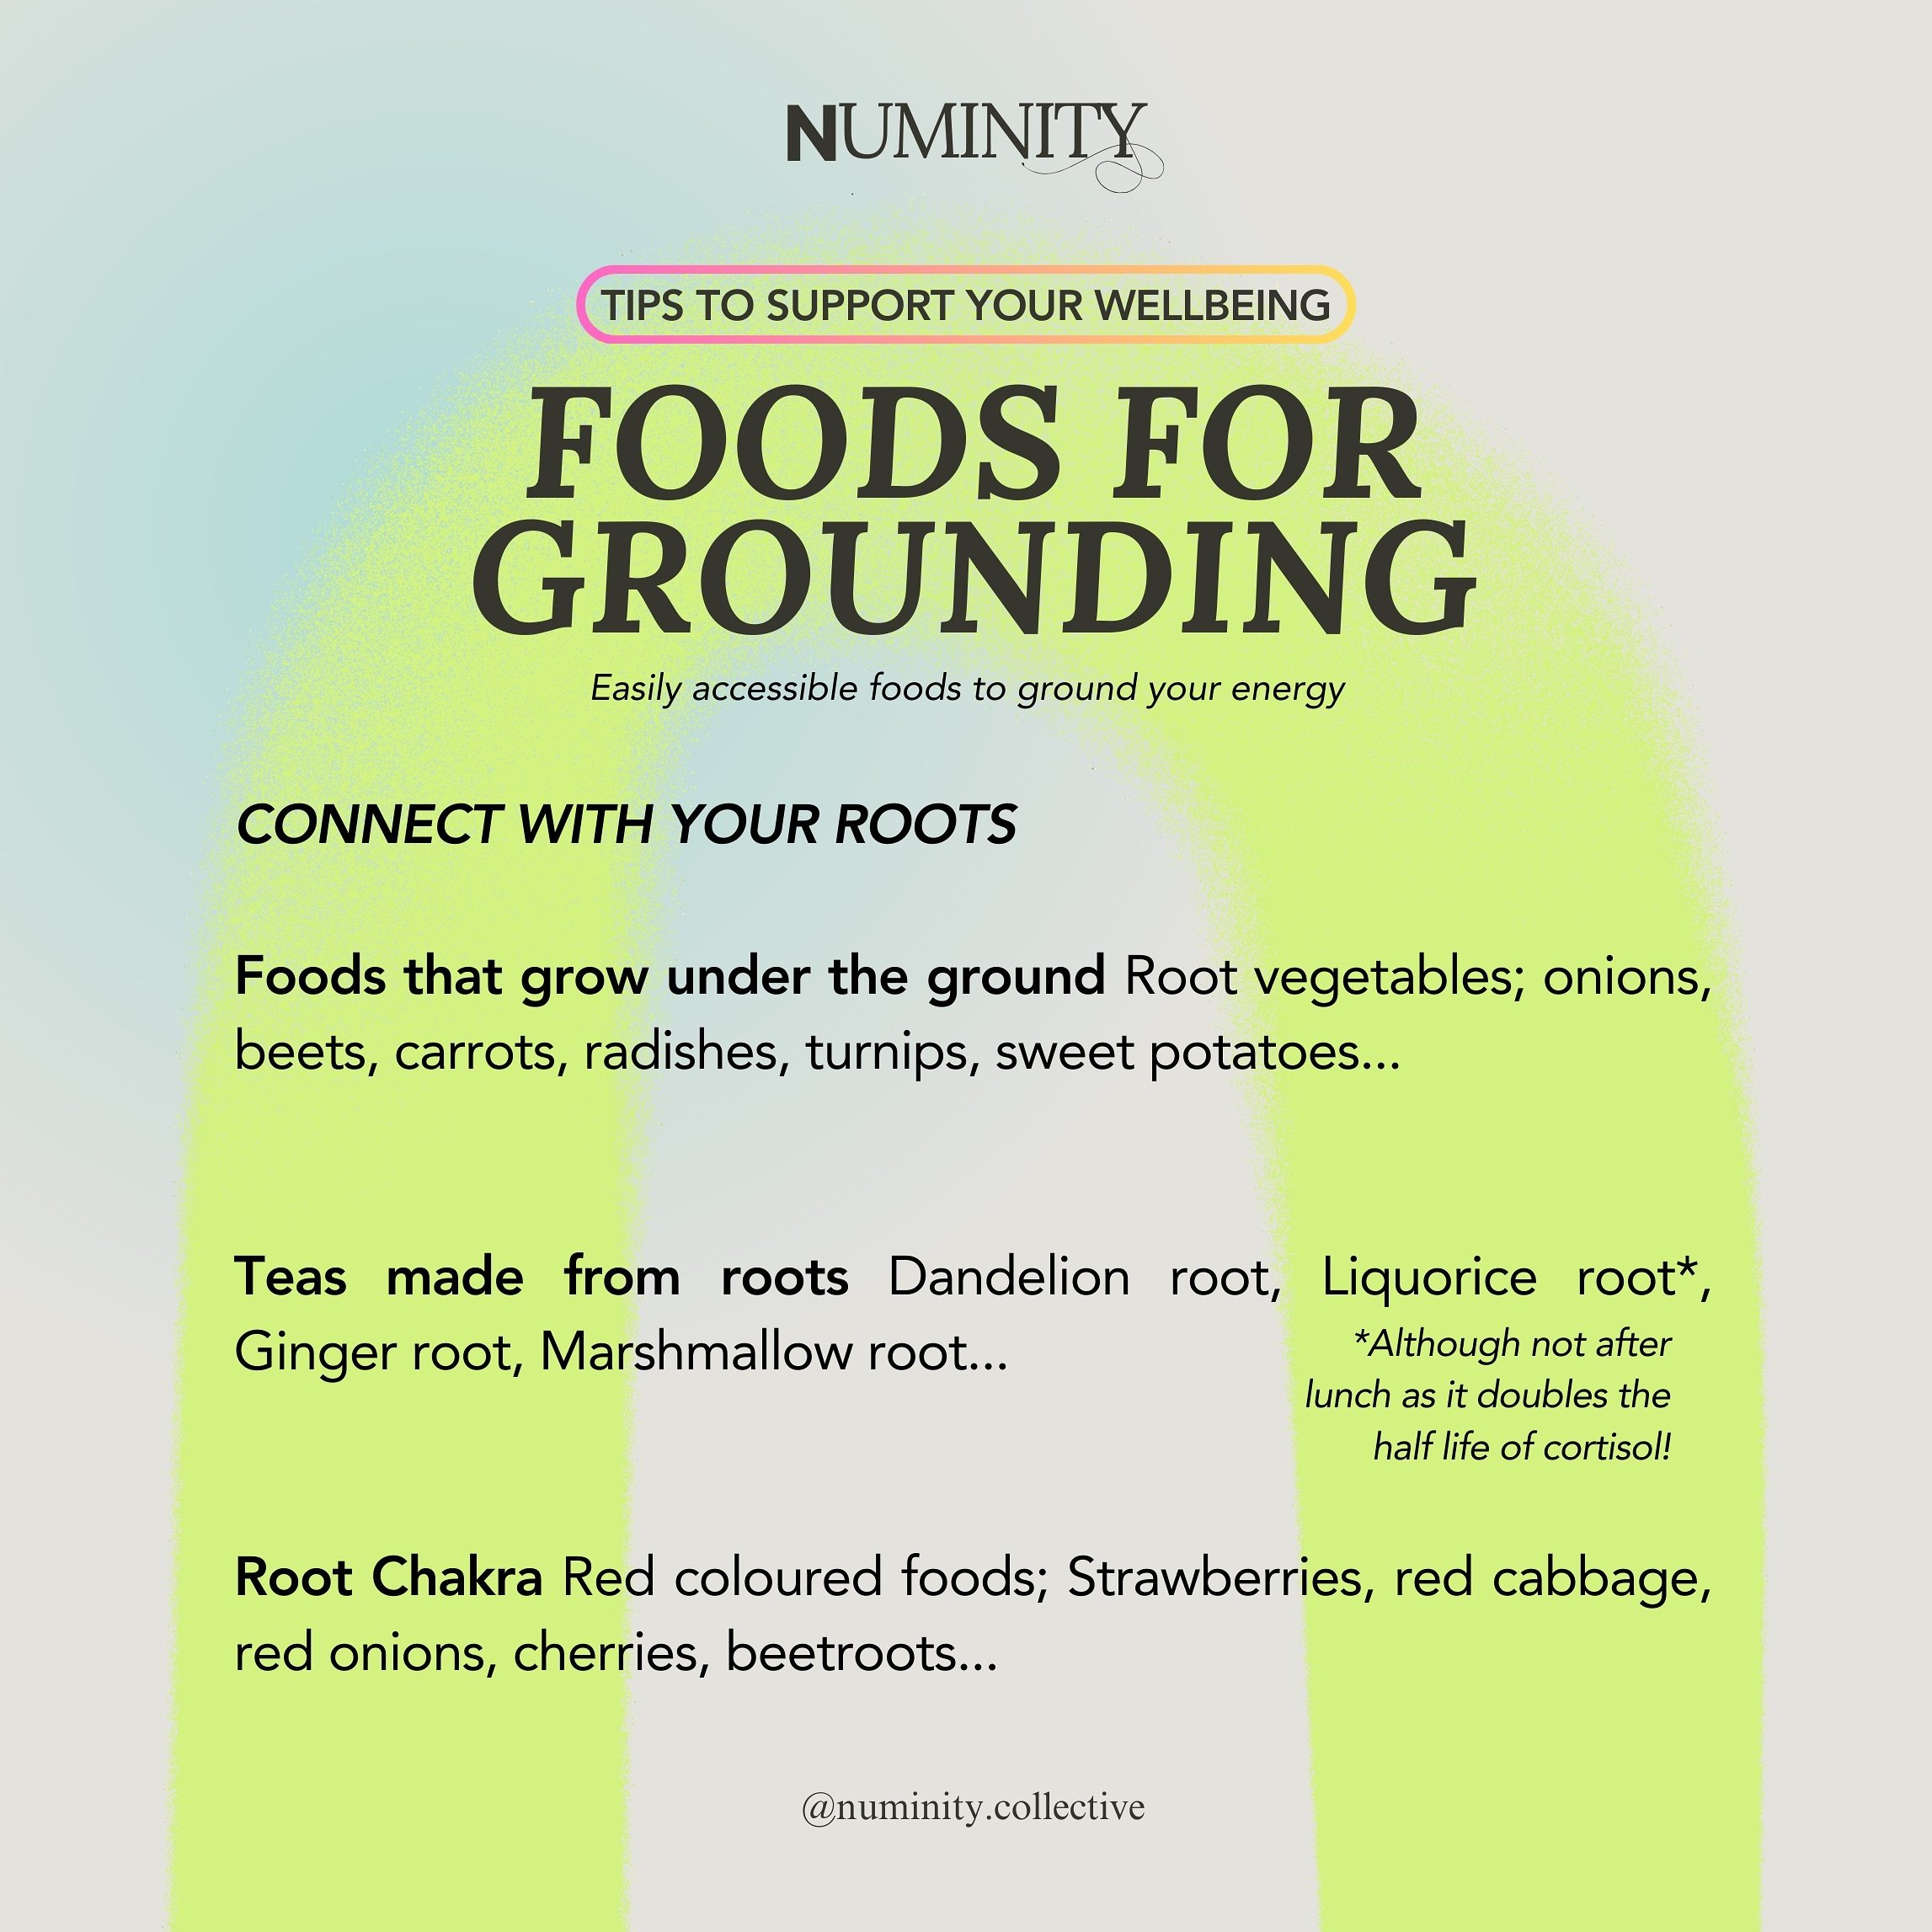 📌Save this post 

FOODS FOR GROUNDING &bull; Connect with your roots! 

Do you have any favourite foods to ground? Comment below! 

#tipstosupportyourwellbeing